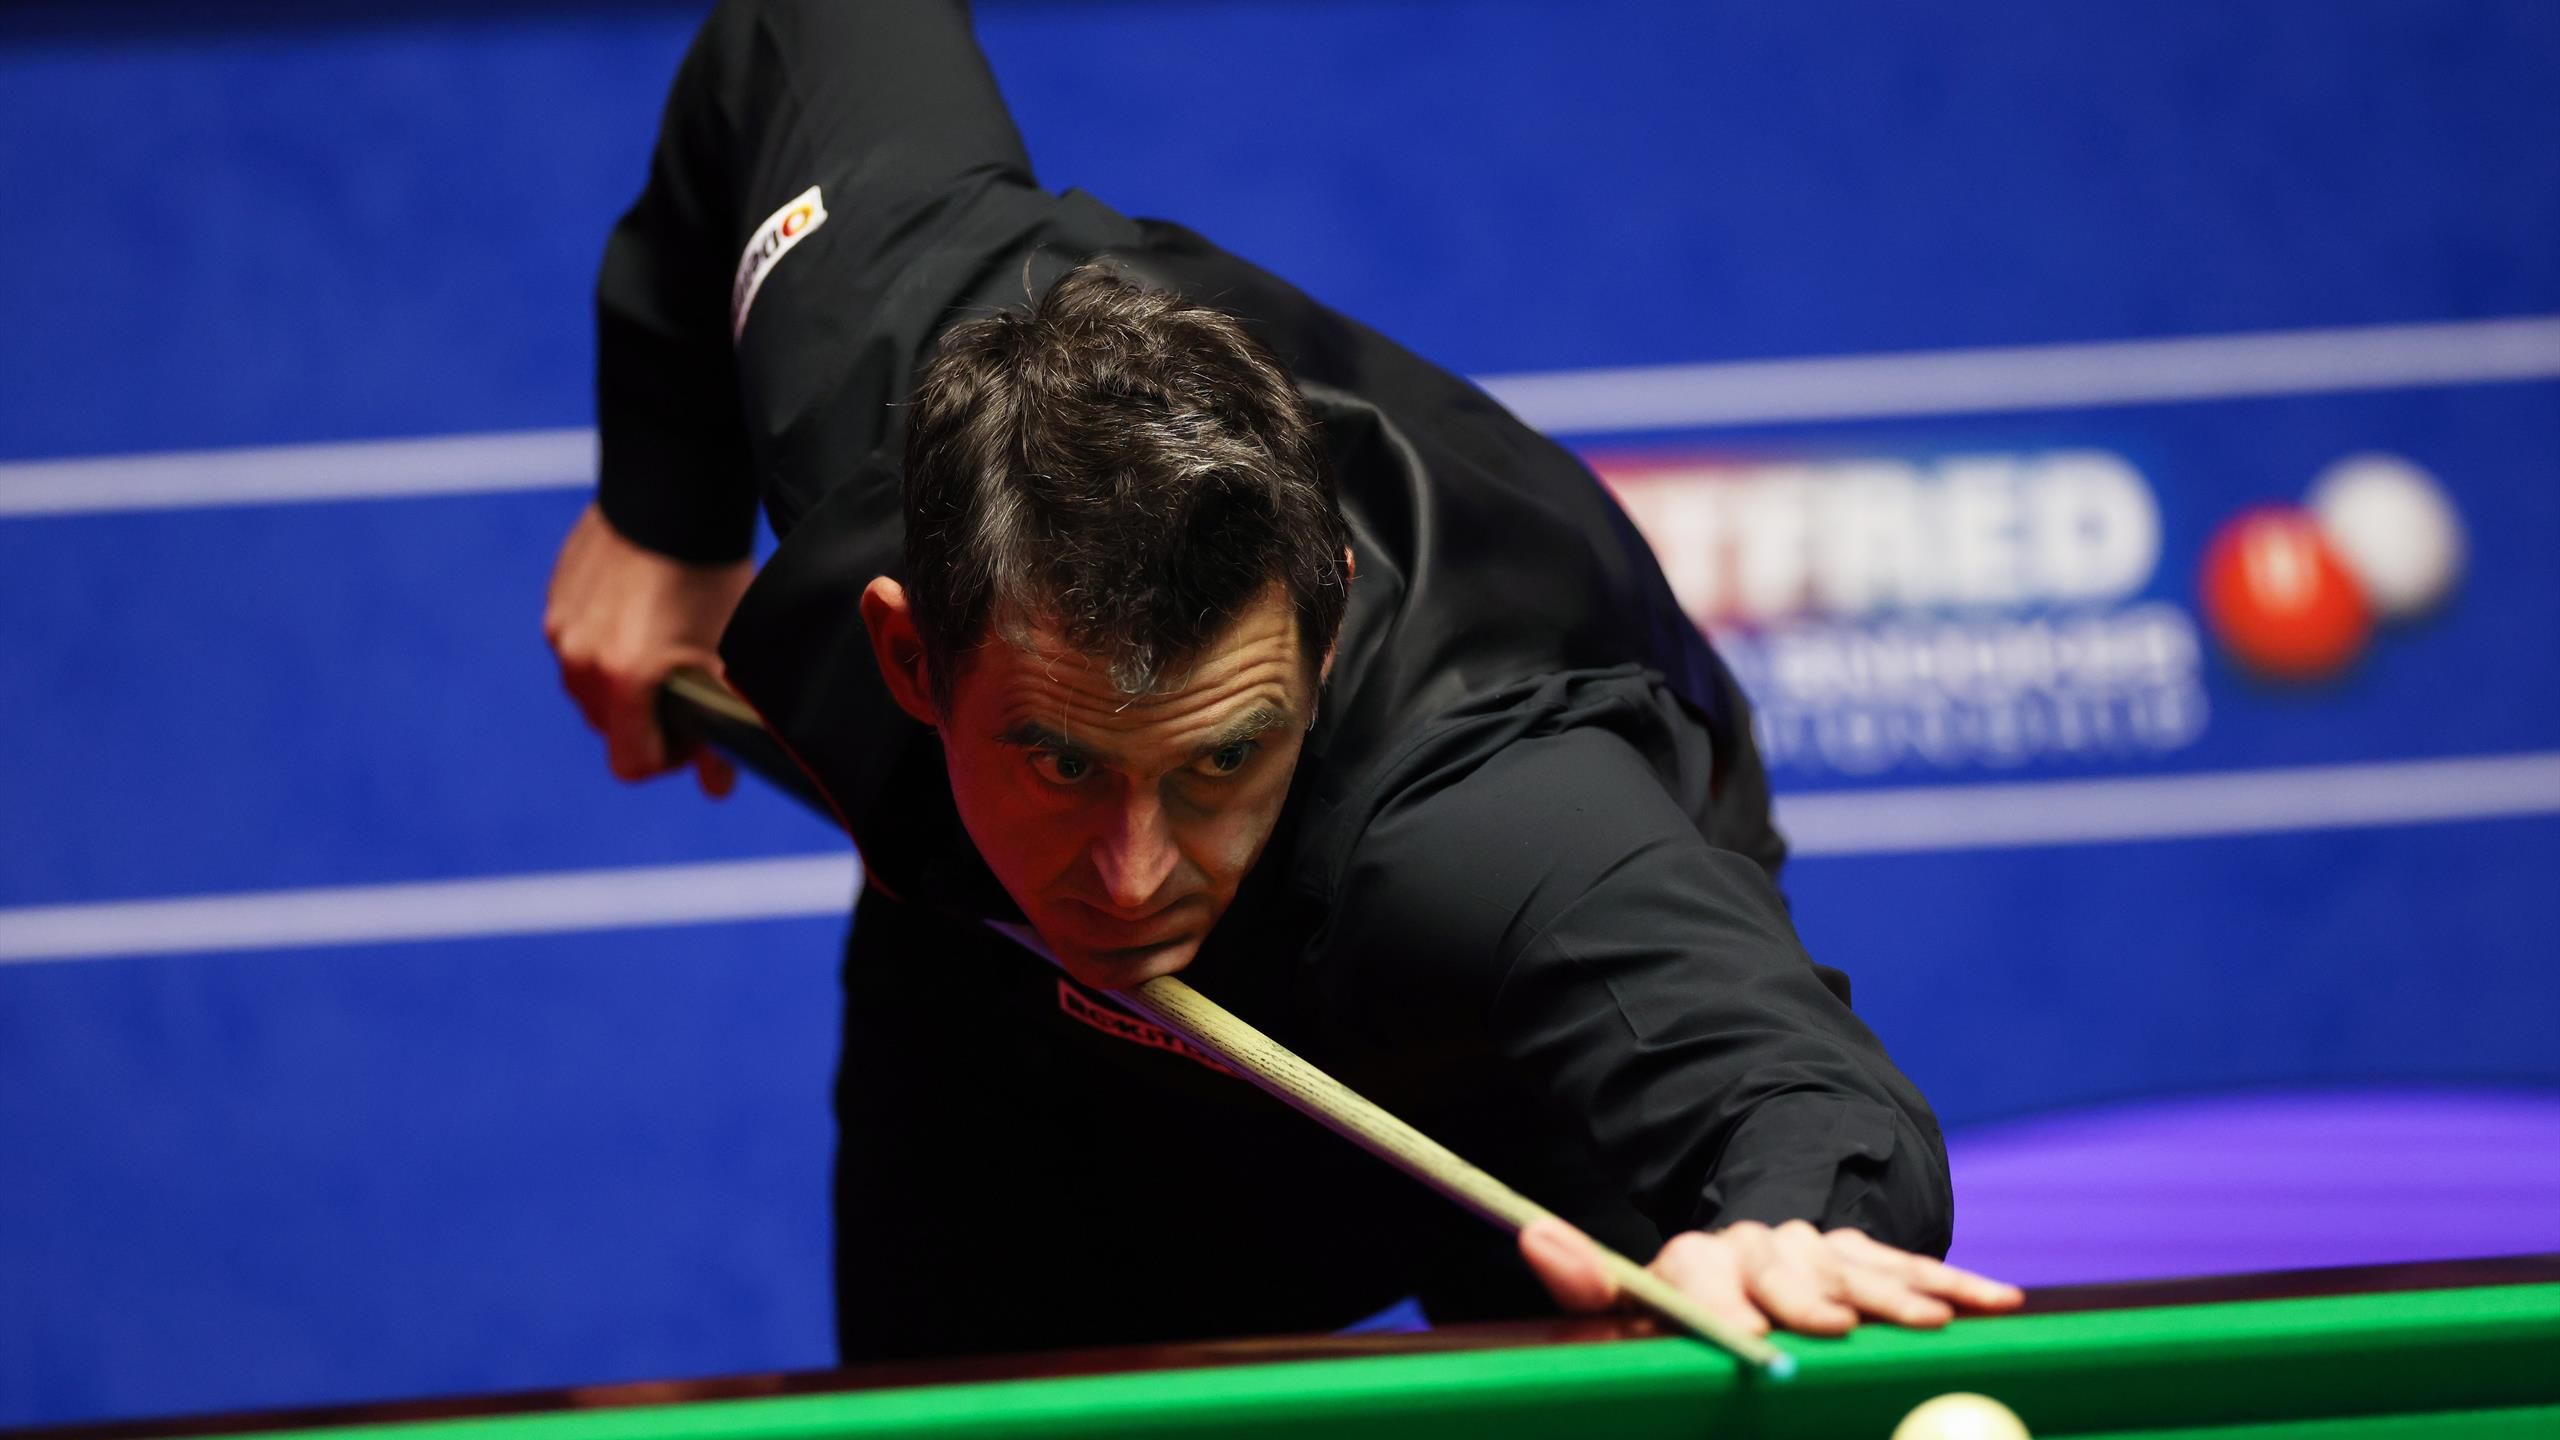 World Snooker Championship 2022 - Ronnie OSullivan completes win over John Higgins to set up final with Judd Trump